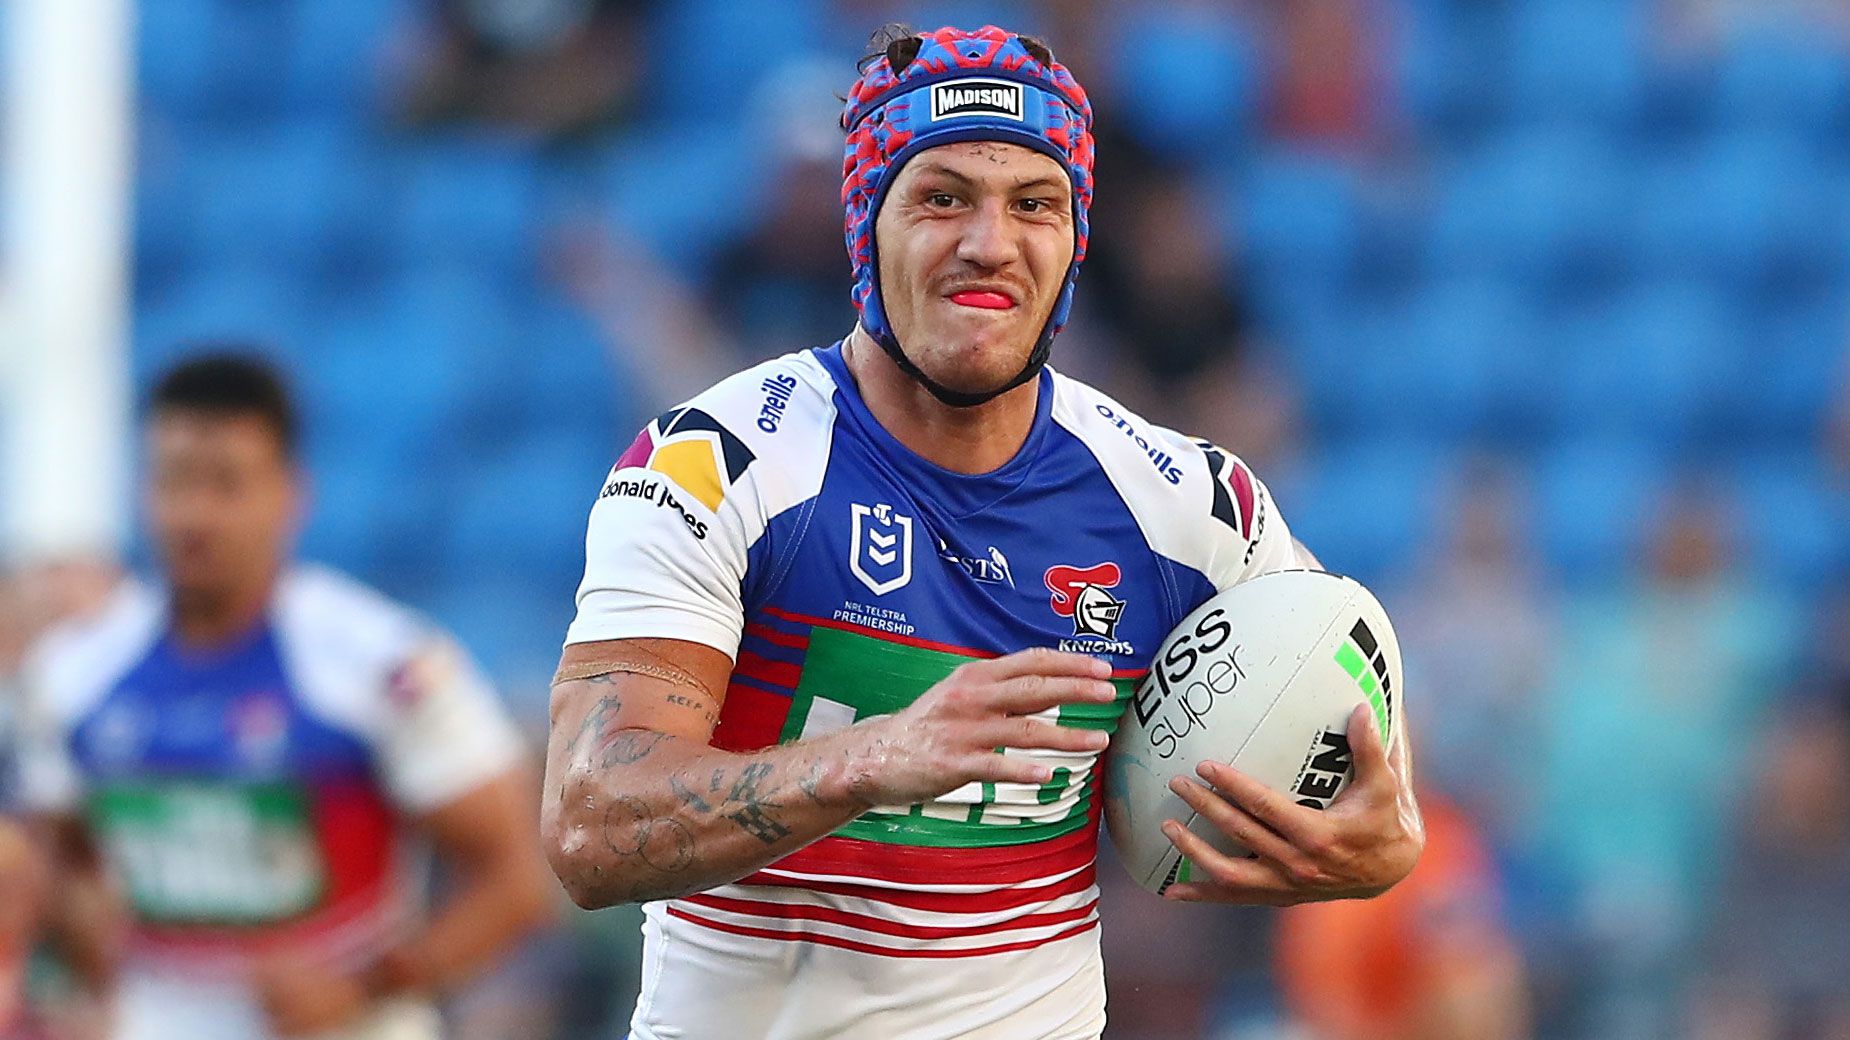 Kalyn Ponga runs the ball for the Knights, who have the second youngest squad in the NRL.